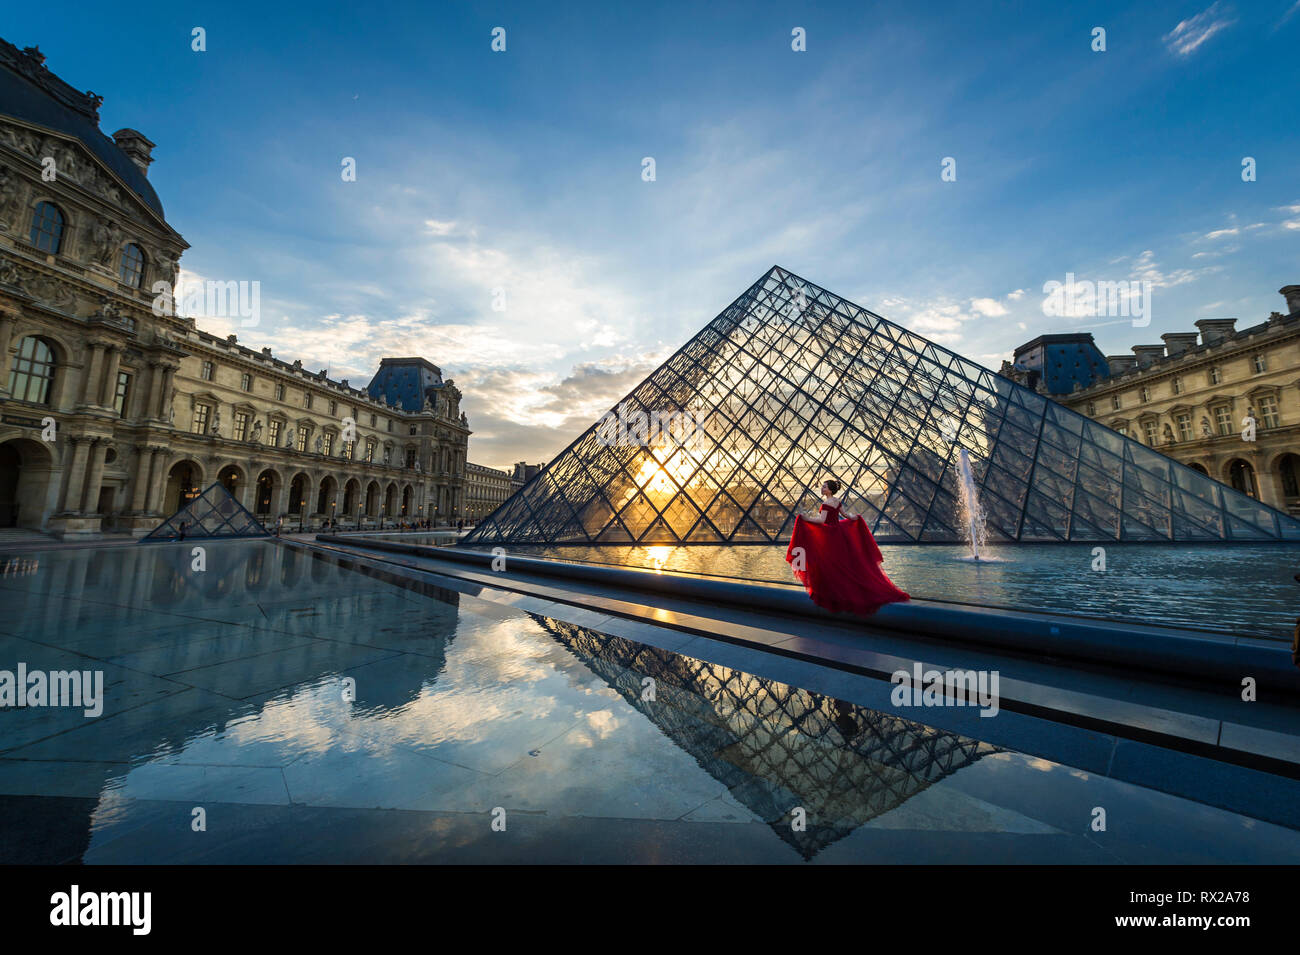 Modell in ein rotes Kleid an Louvre Pyramide bei Sonnenuntergang Stockfoto